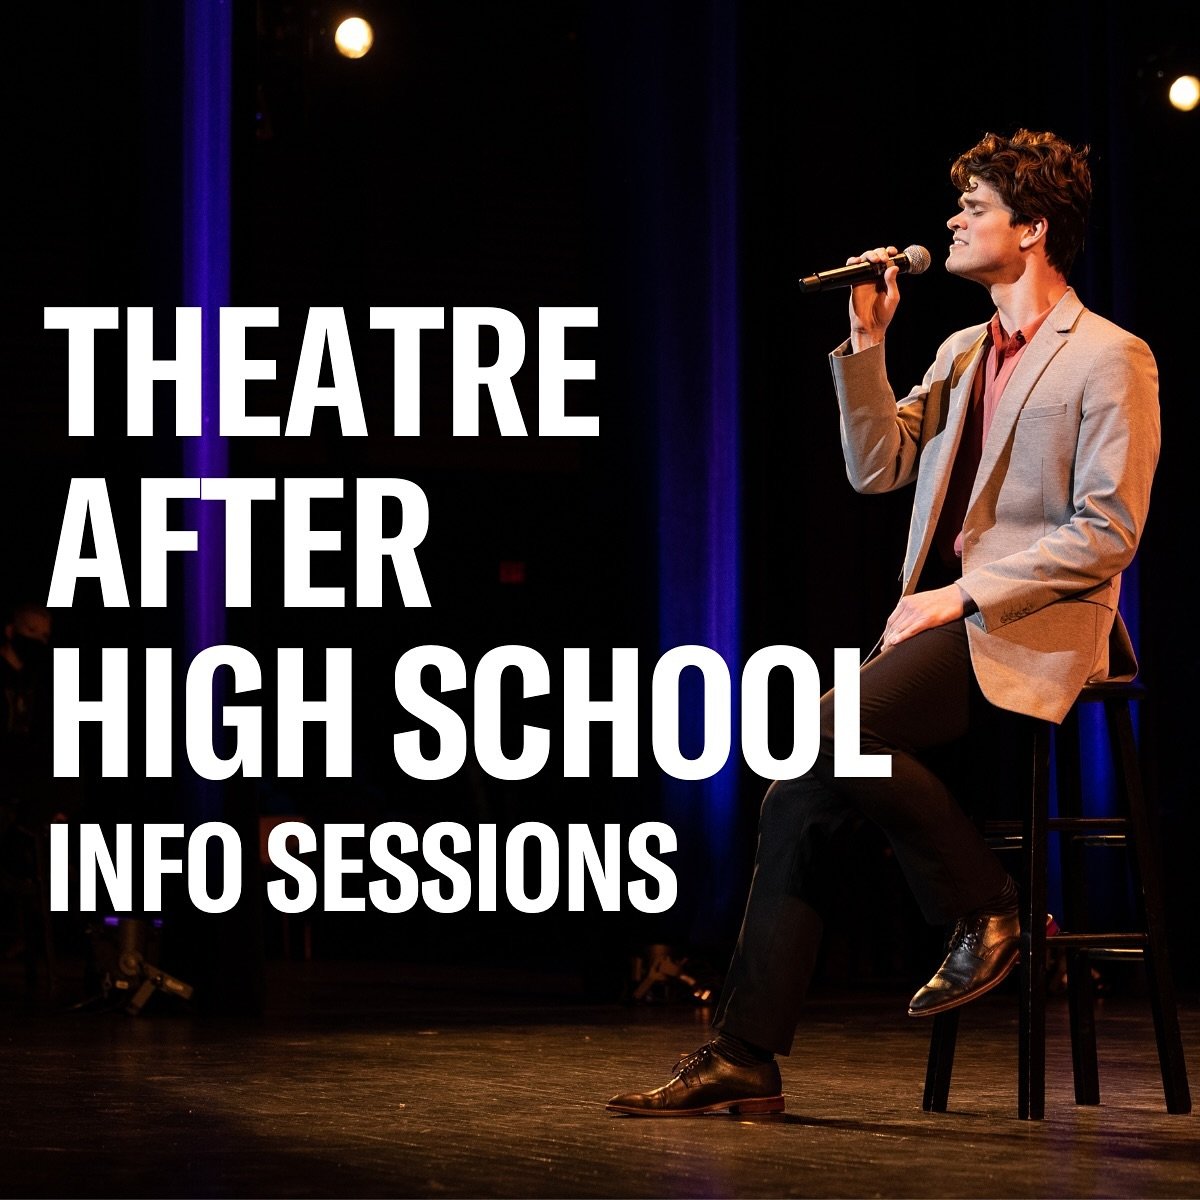 Don&rsquo;t Forget!

Theatre After High School Sessions are THIS Saturday!

Are you interested in learning more about pursuing theatre in college or professionally?&nbsp; If so, these FREE Info Sessions for Rising 8th-12th Graders are for YOU!

Here 